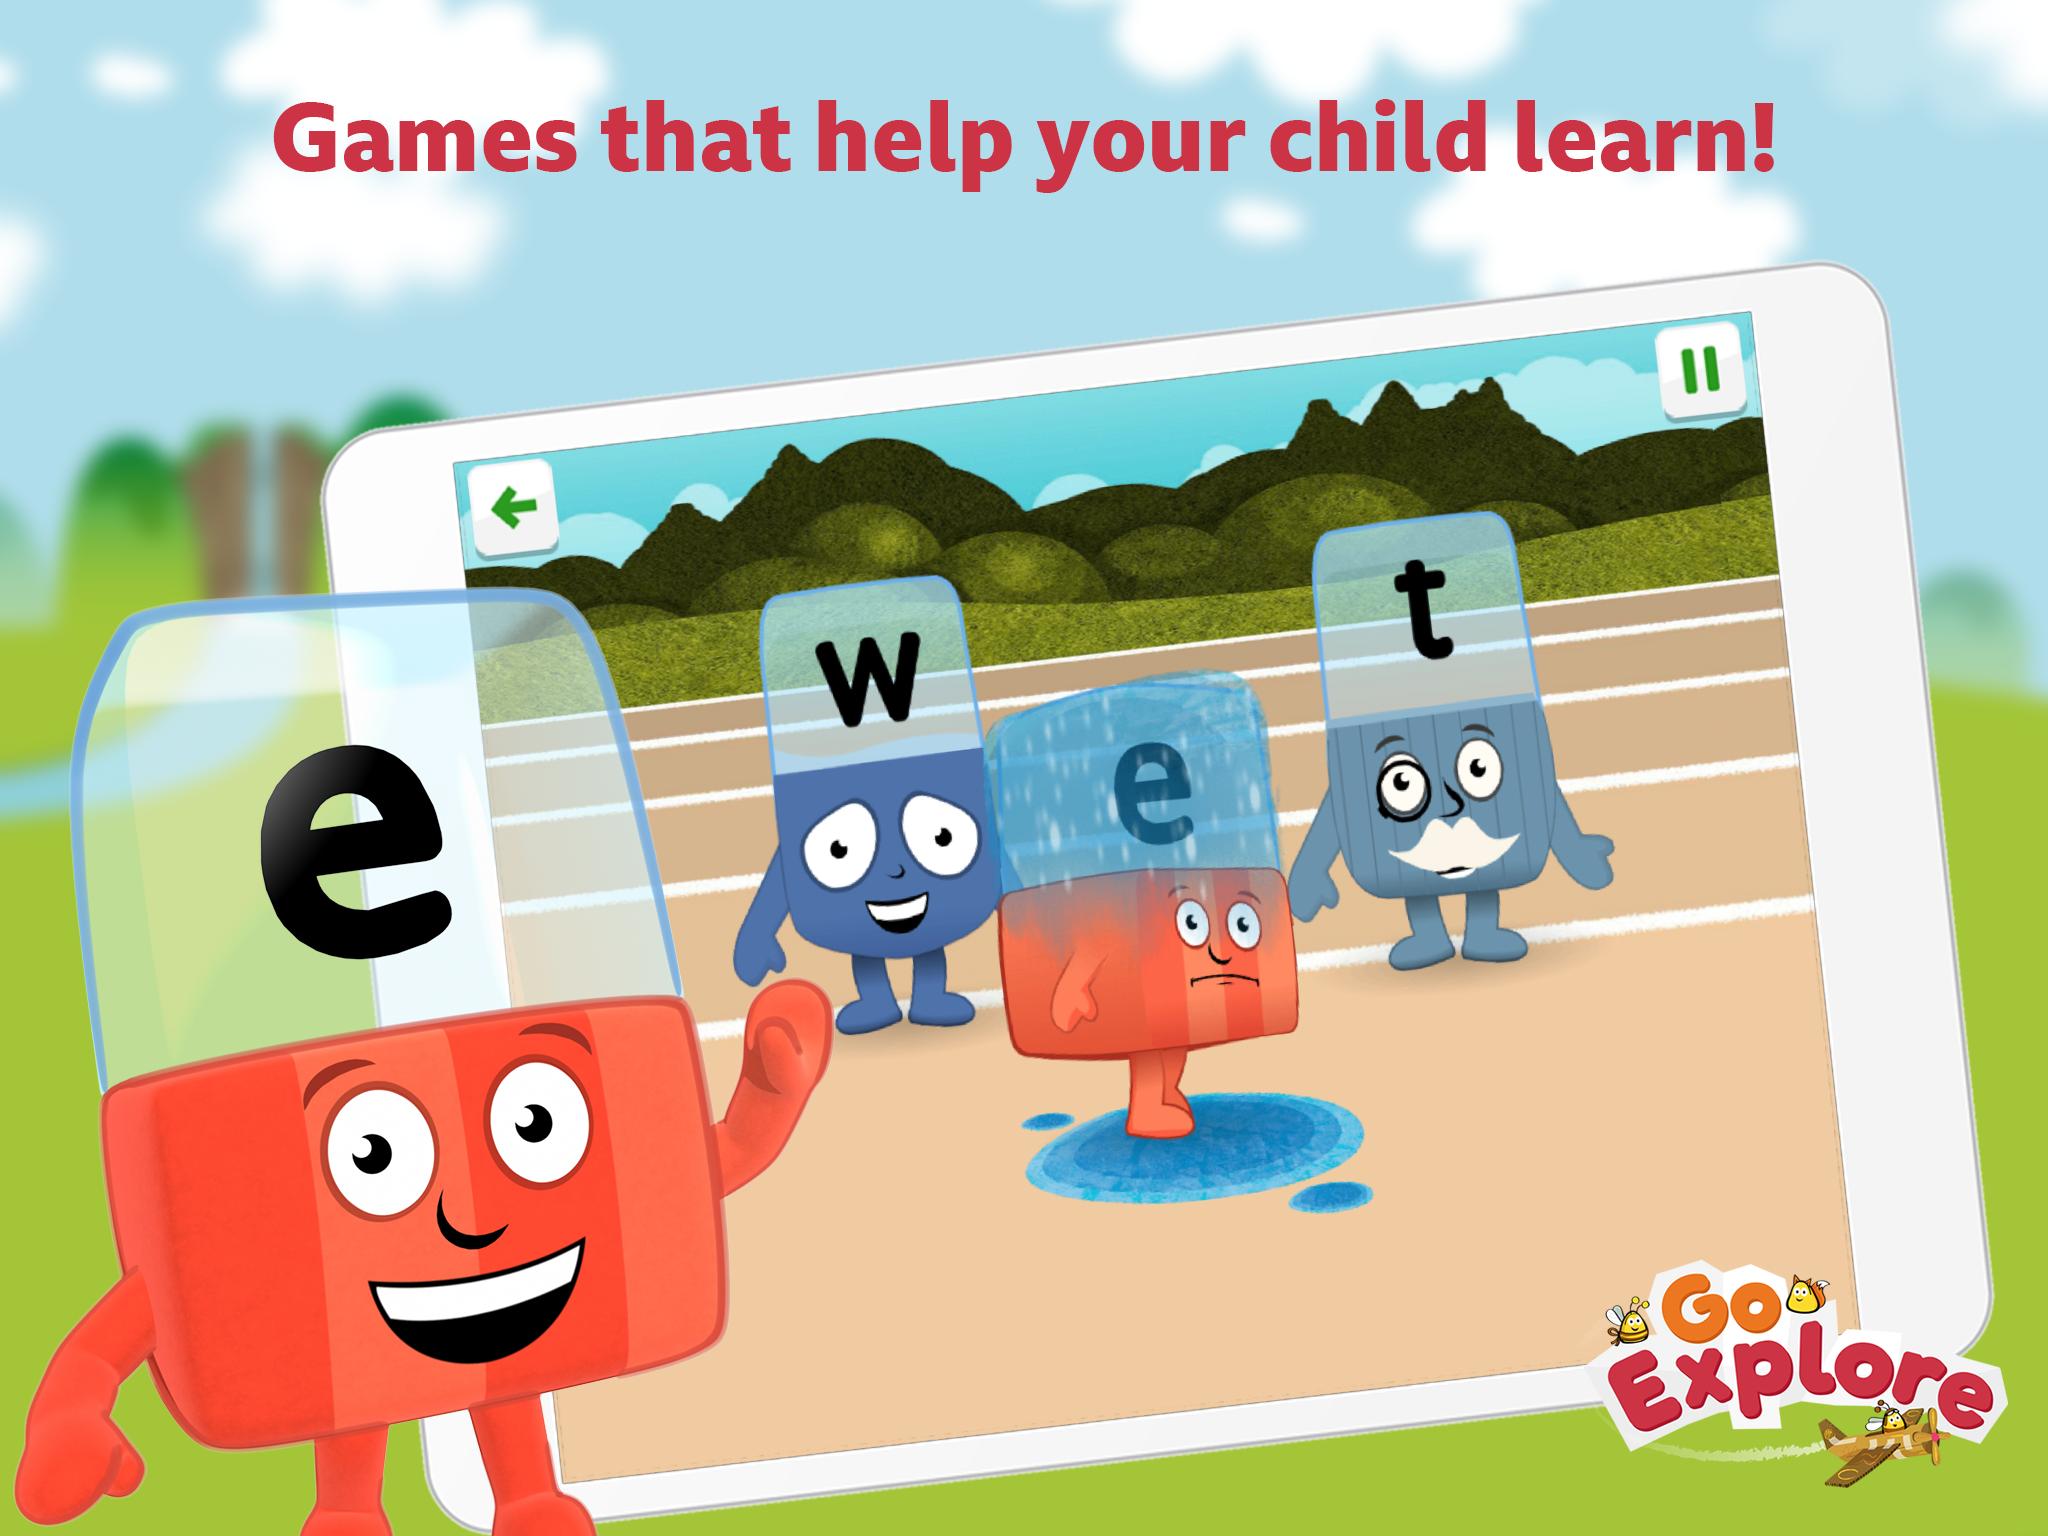 BBC CBeebies Go Explore - Learning games for kids 2.4.0 Screenshot 7